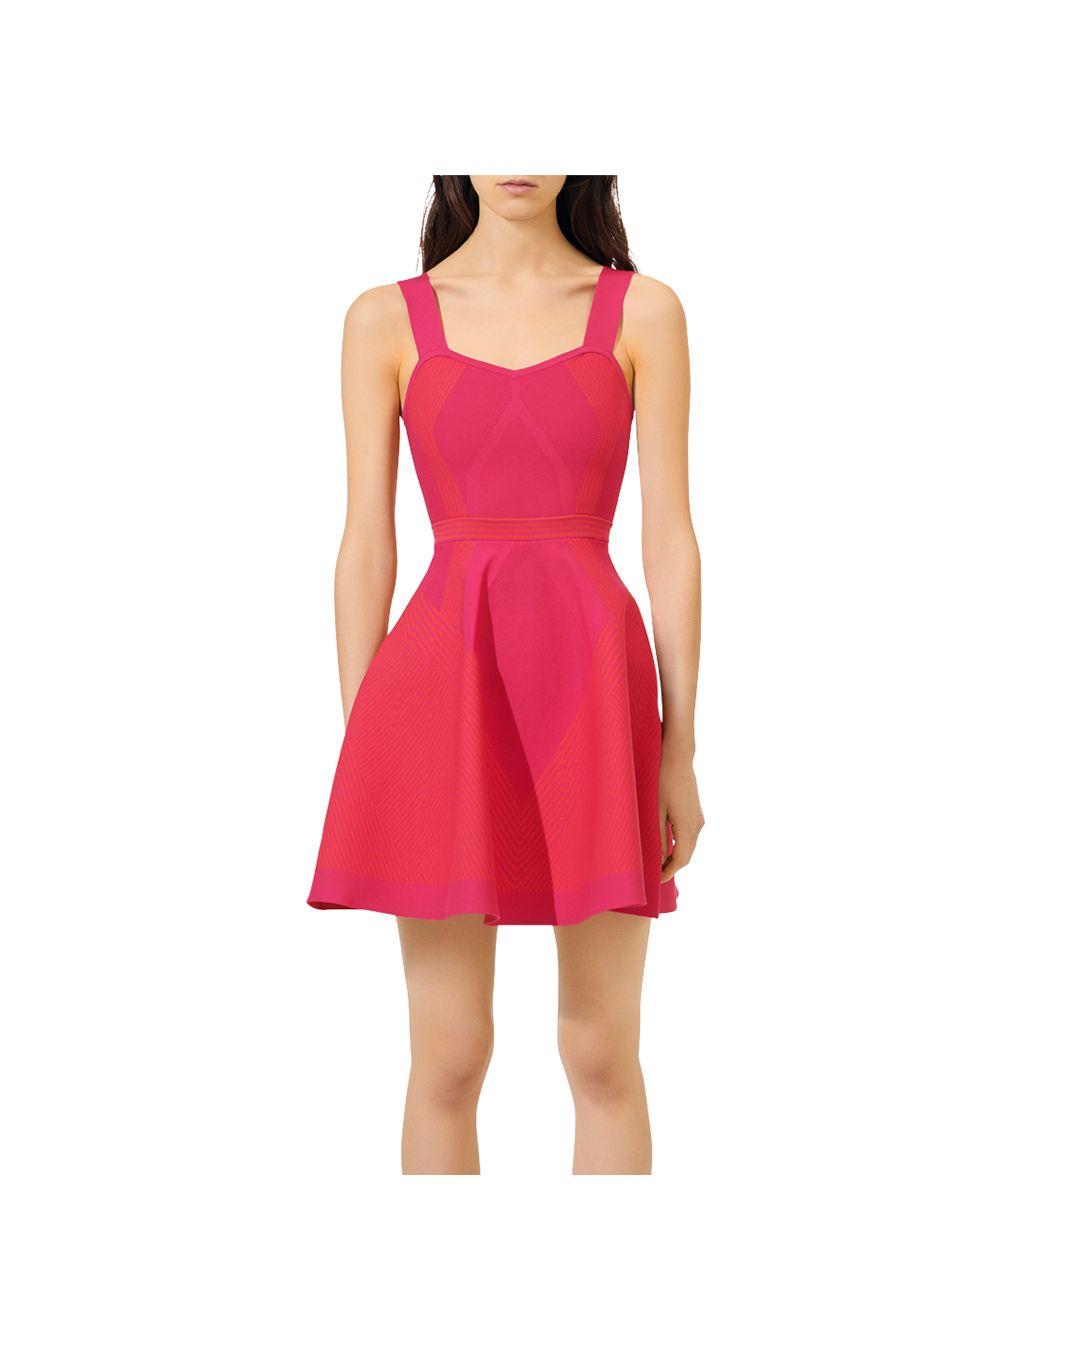 Maje Synthetic Reliefa Dress in Fuchsia (Red) - Lyst